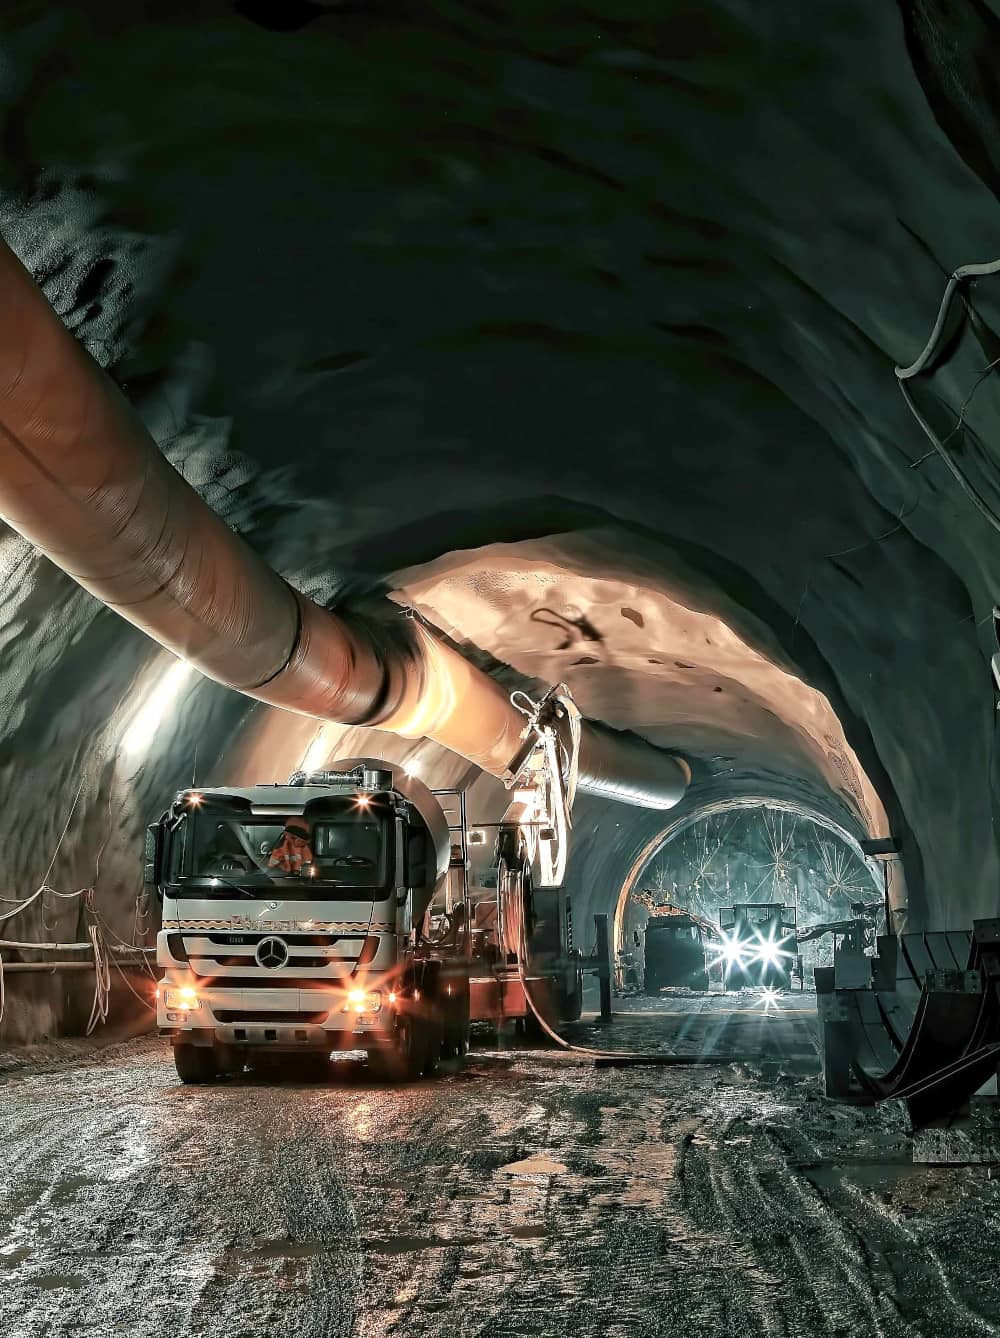 A tunnel under construction